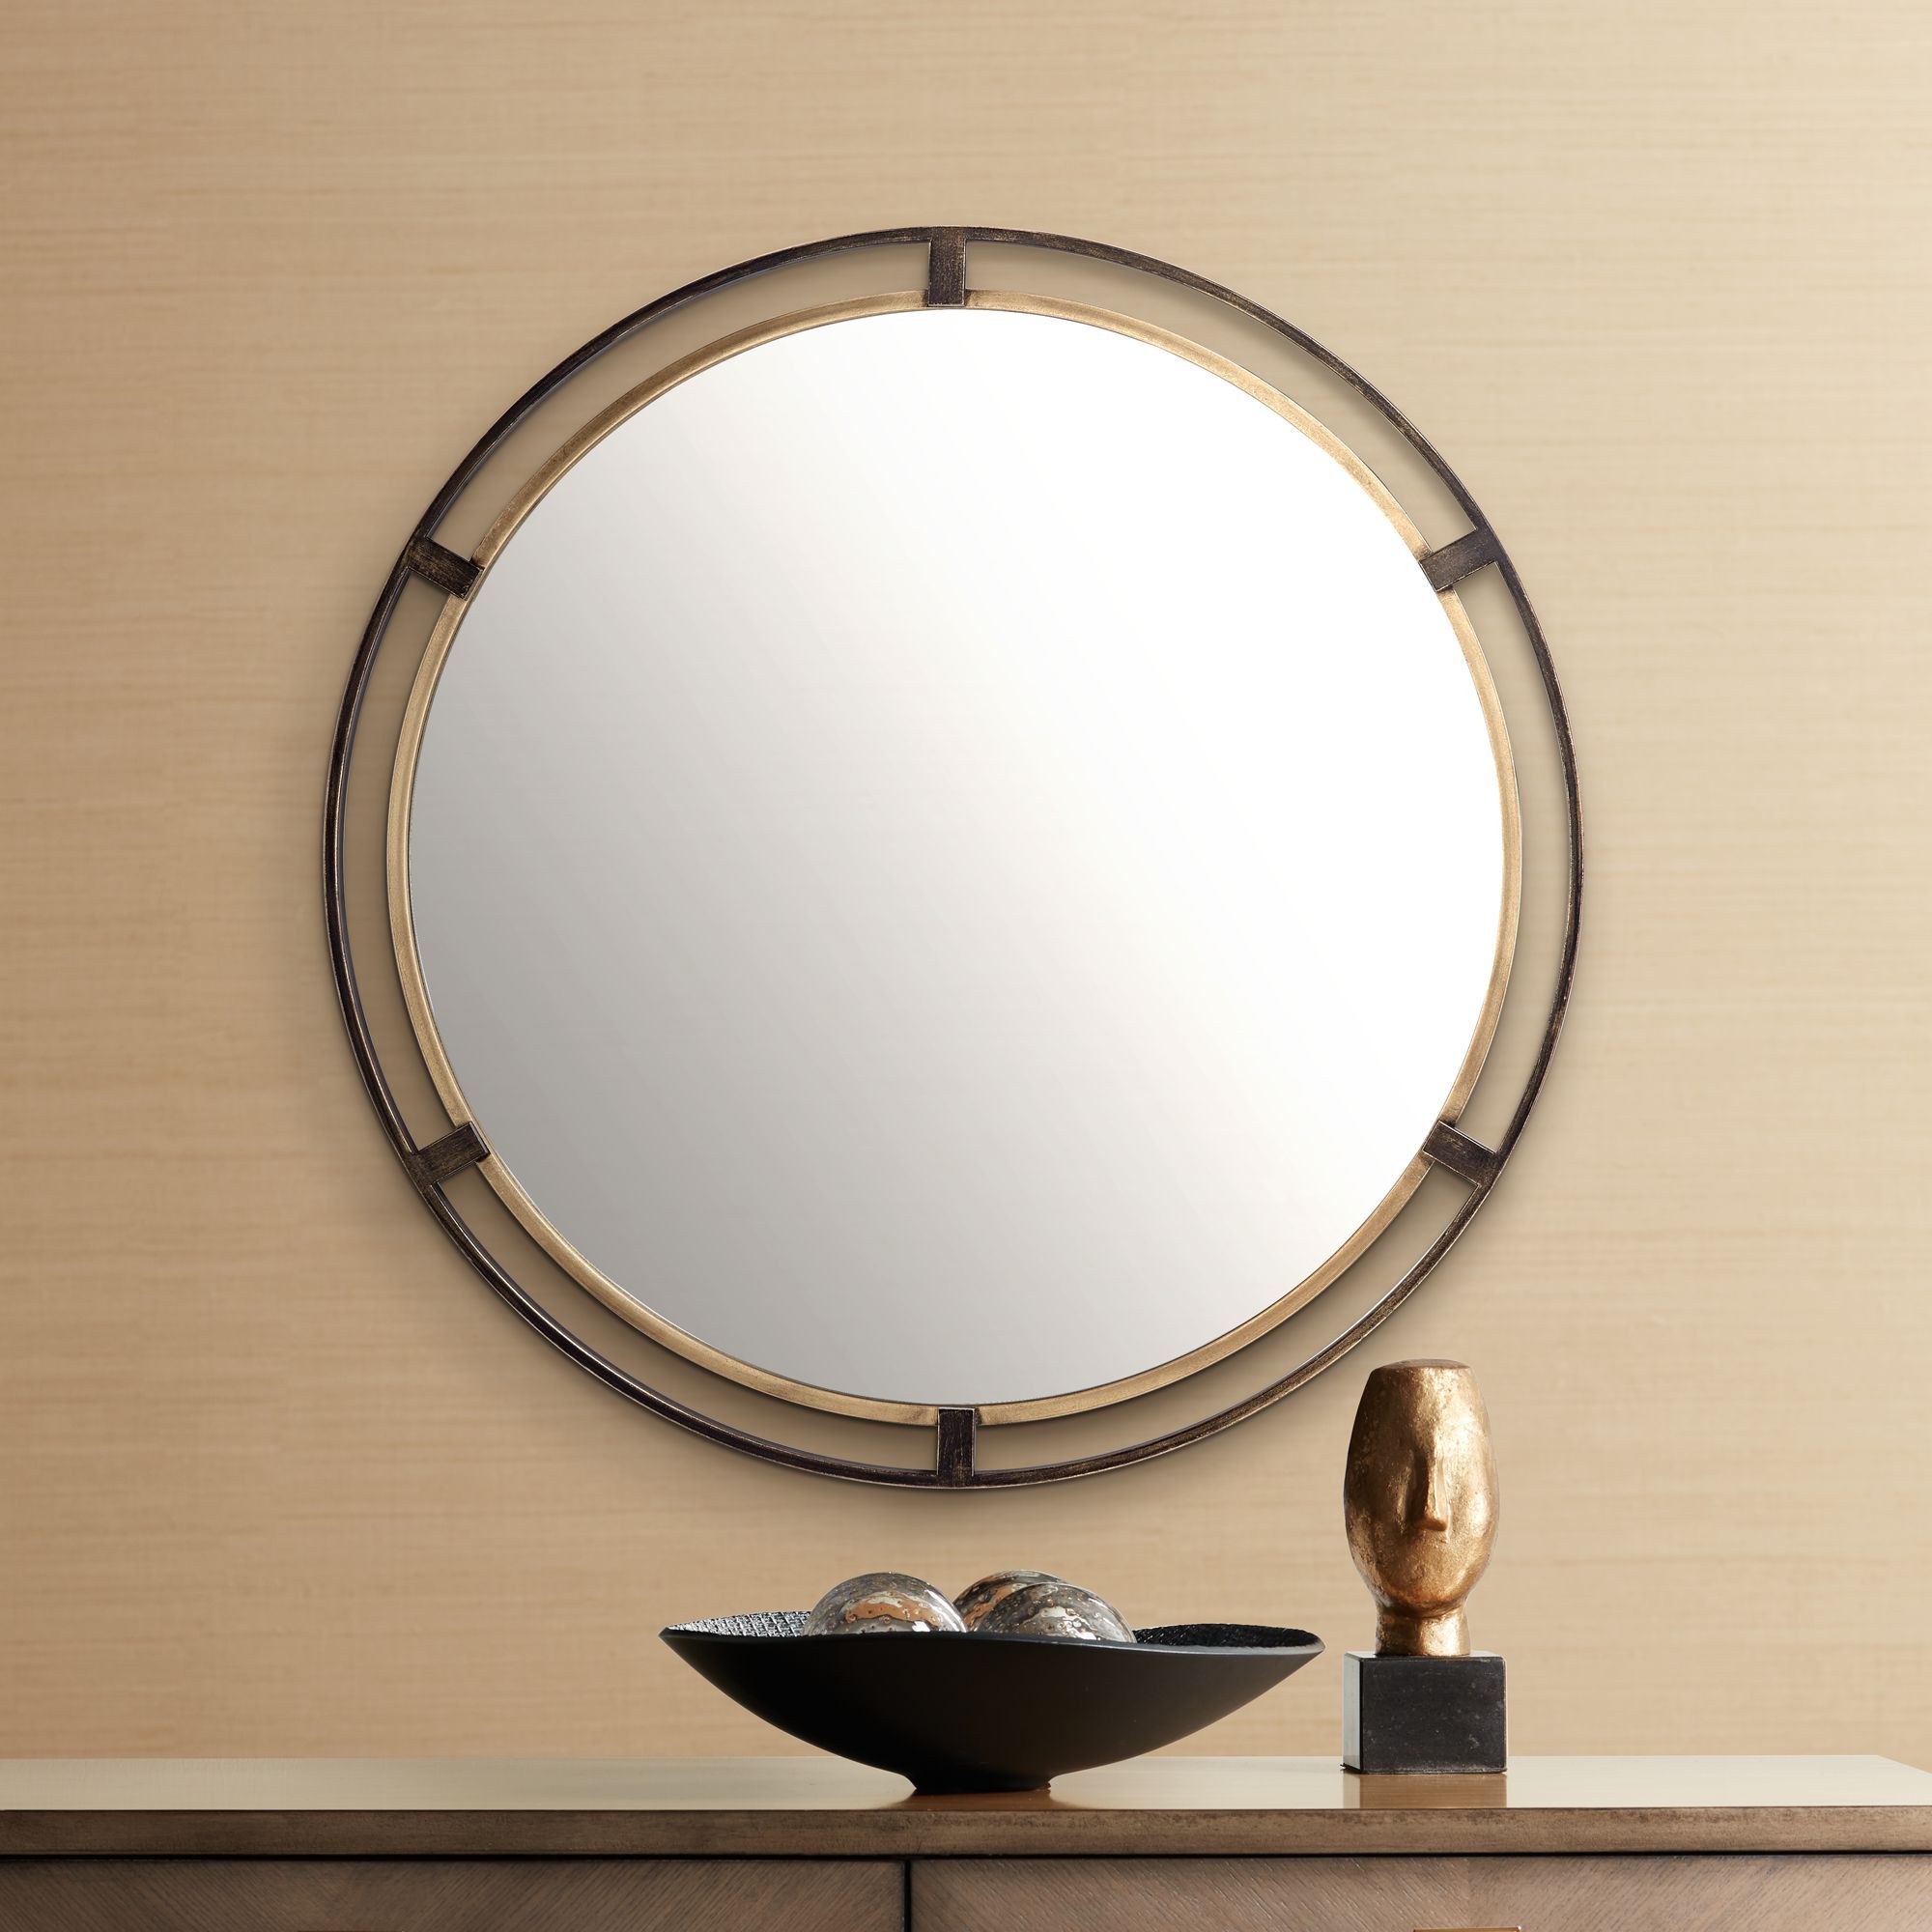 Silver And Bronze Wall Mirrors Pertaining To 2019 Uttermost Crest Bronze And Gold 34" Round Wall Mirror – Walmart (View 15 of 15)